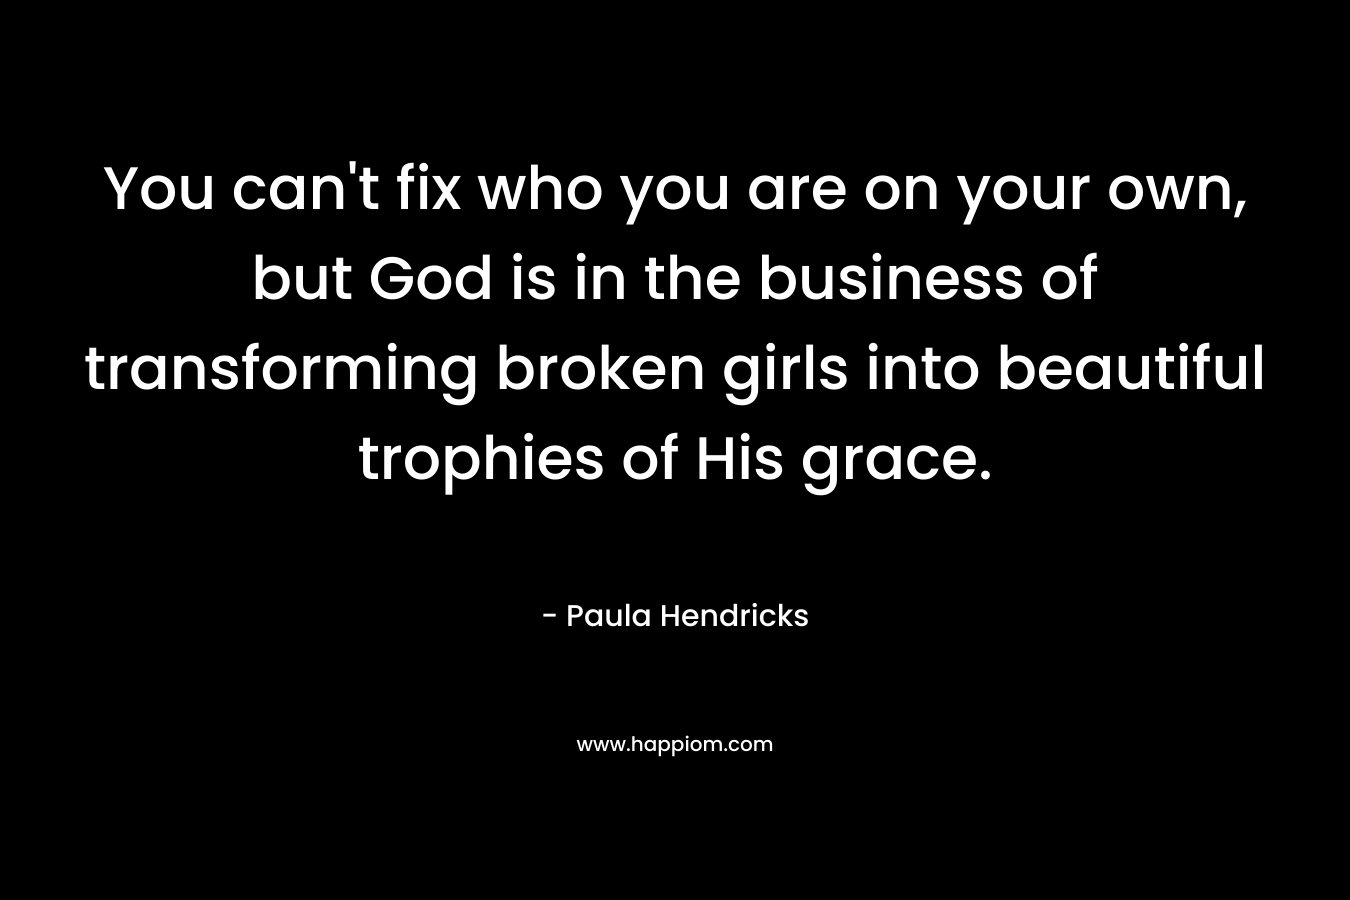 You can’t fix who you are on your own, but God is in the business of transforming broken girls into beautiful trophies of His grace. – Paula Hendricks